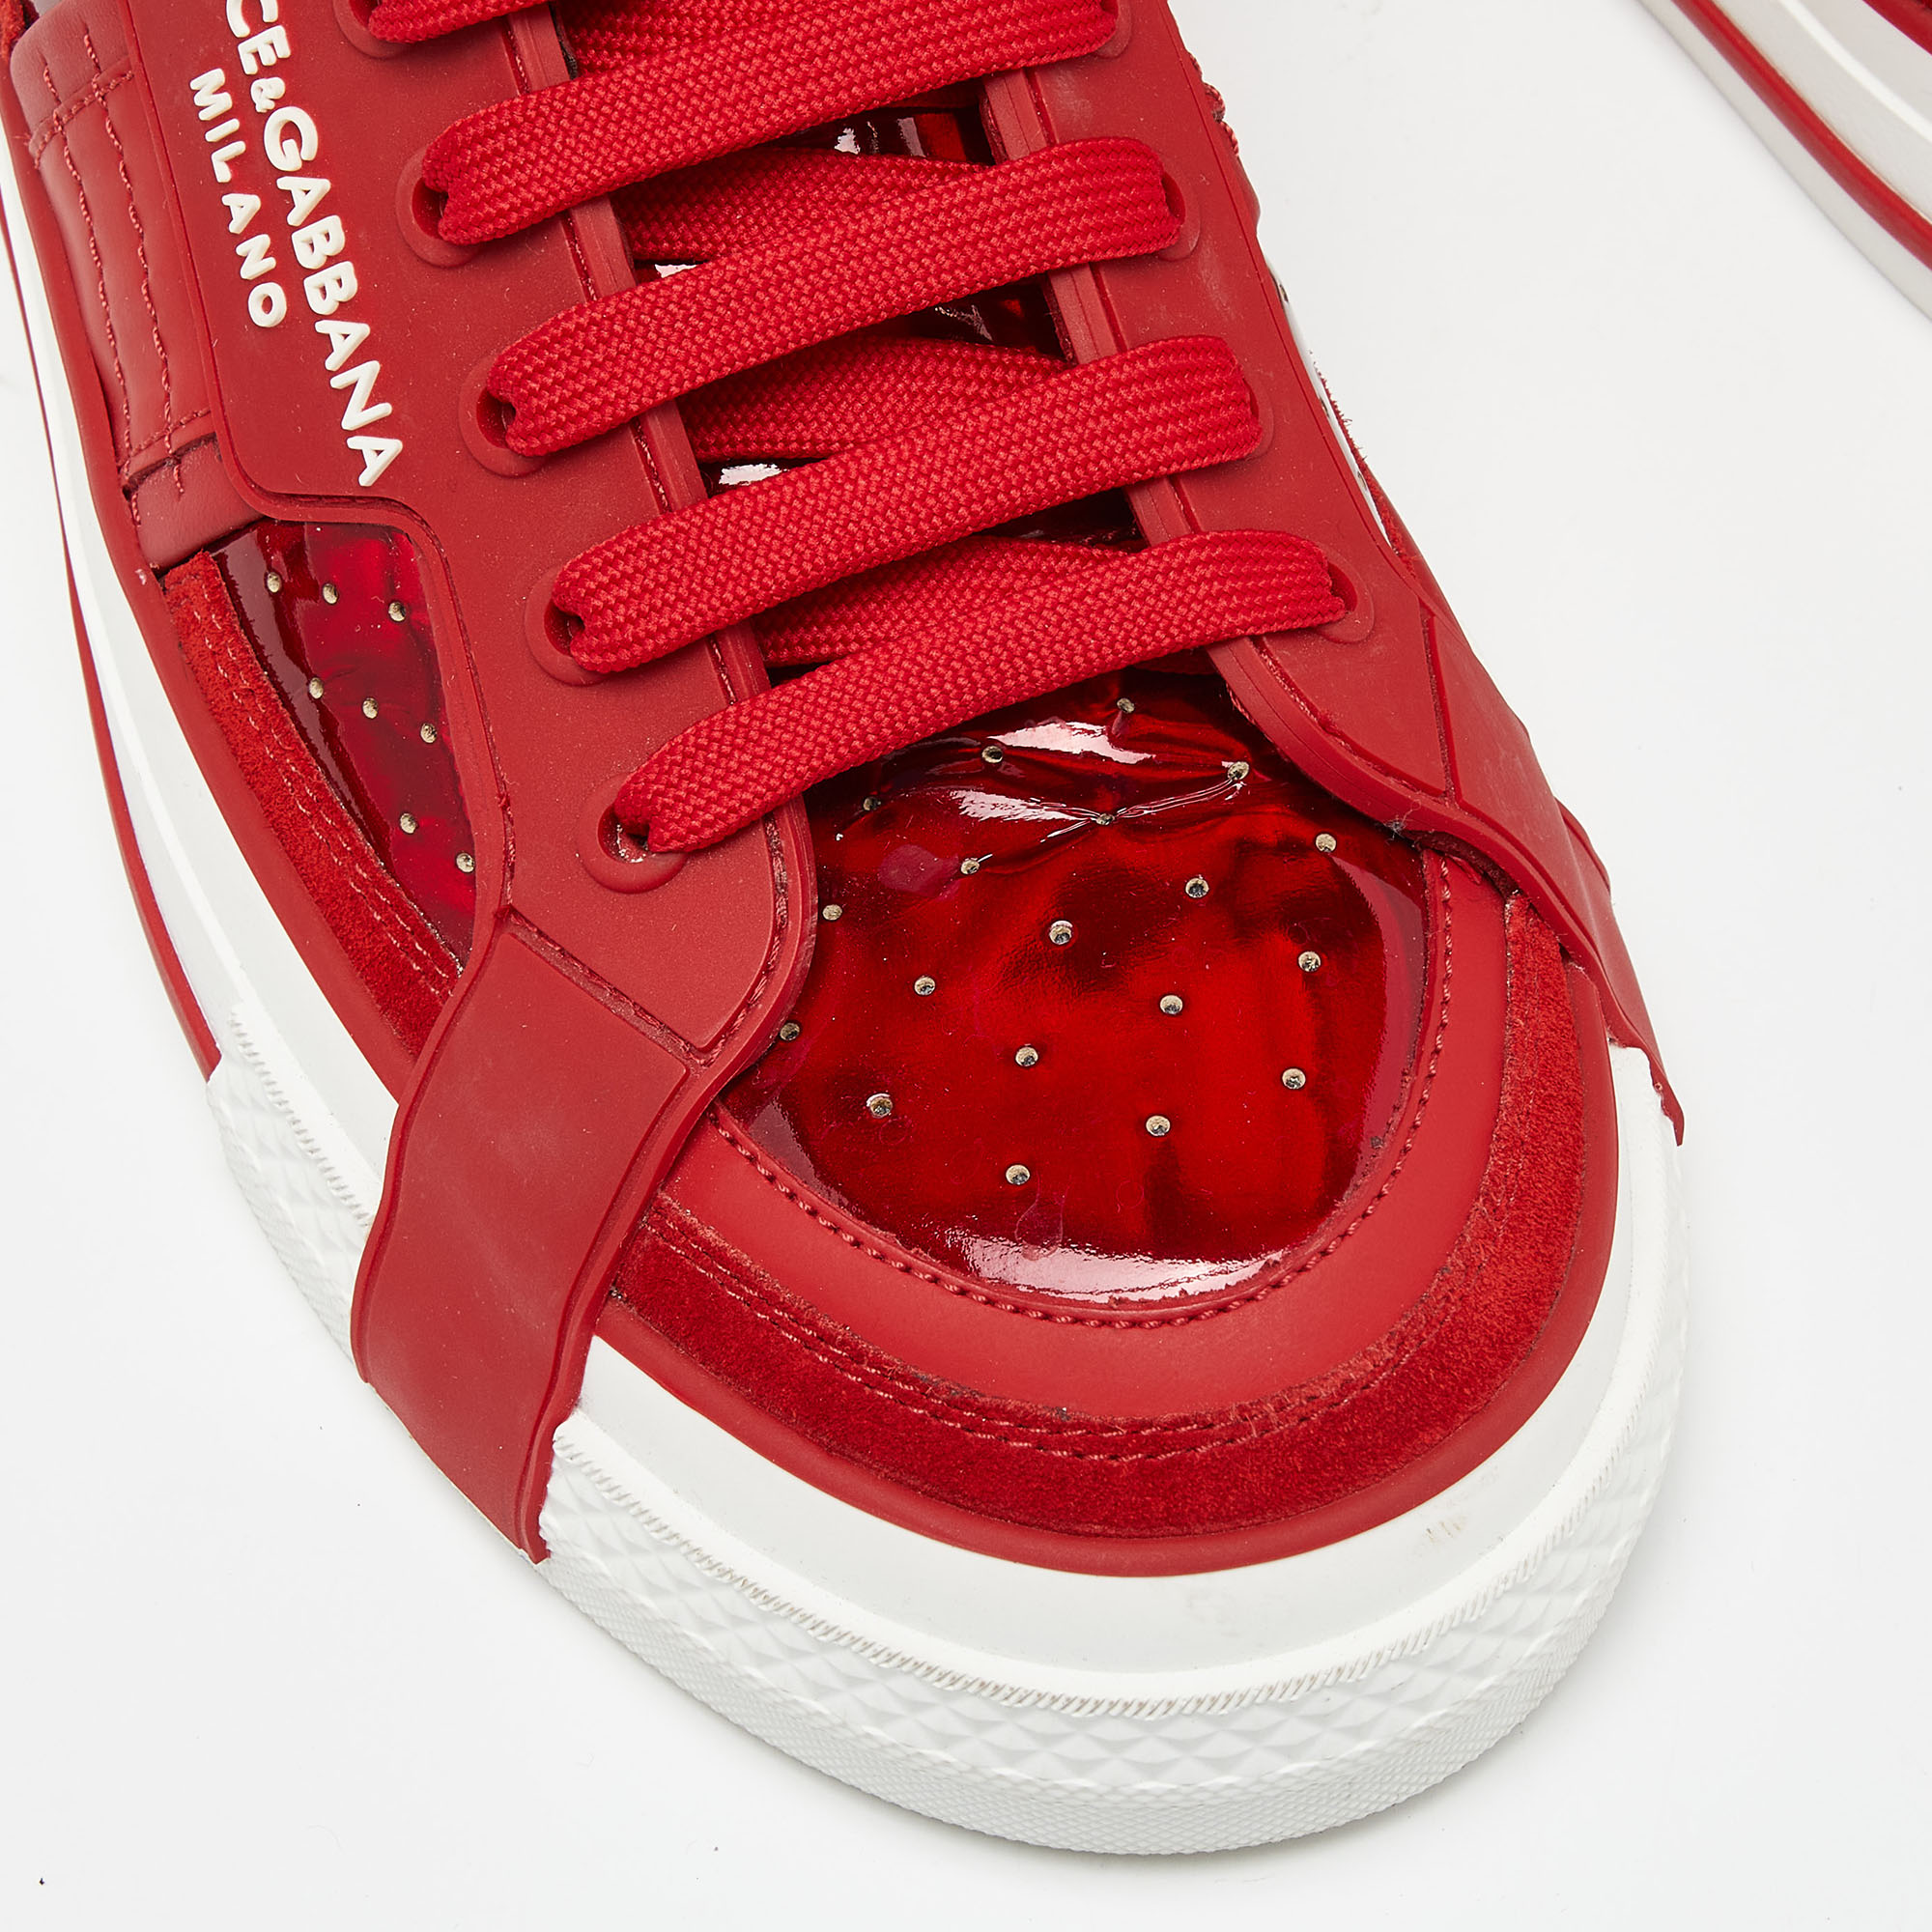 Dolce & Gabbana Red Leather And PVC Custom 2.Zero Sneakers Size 42.5